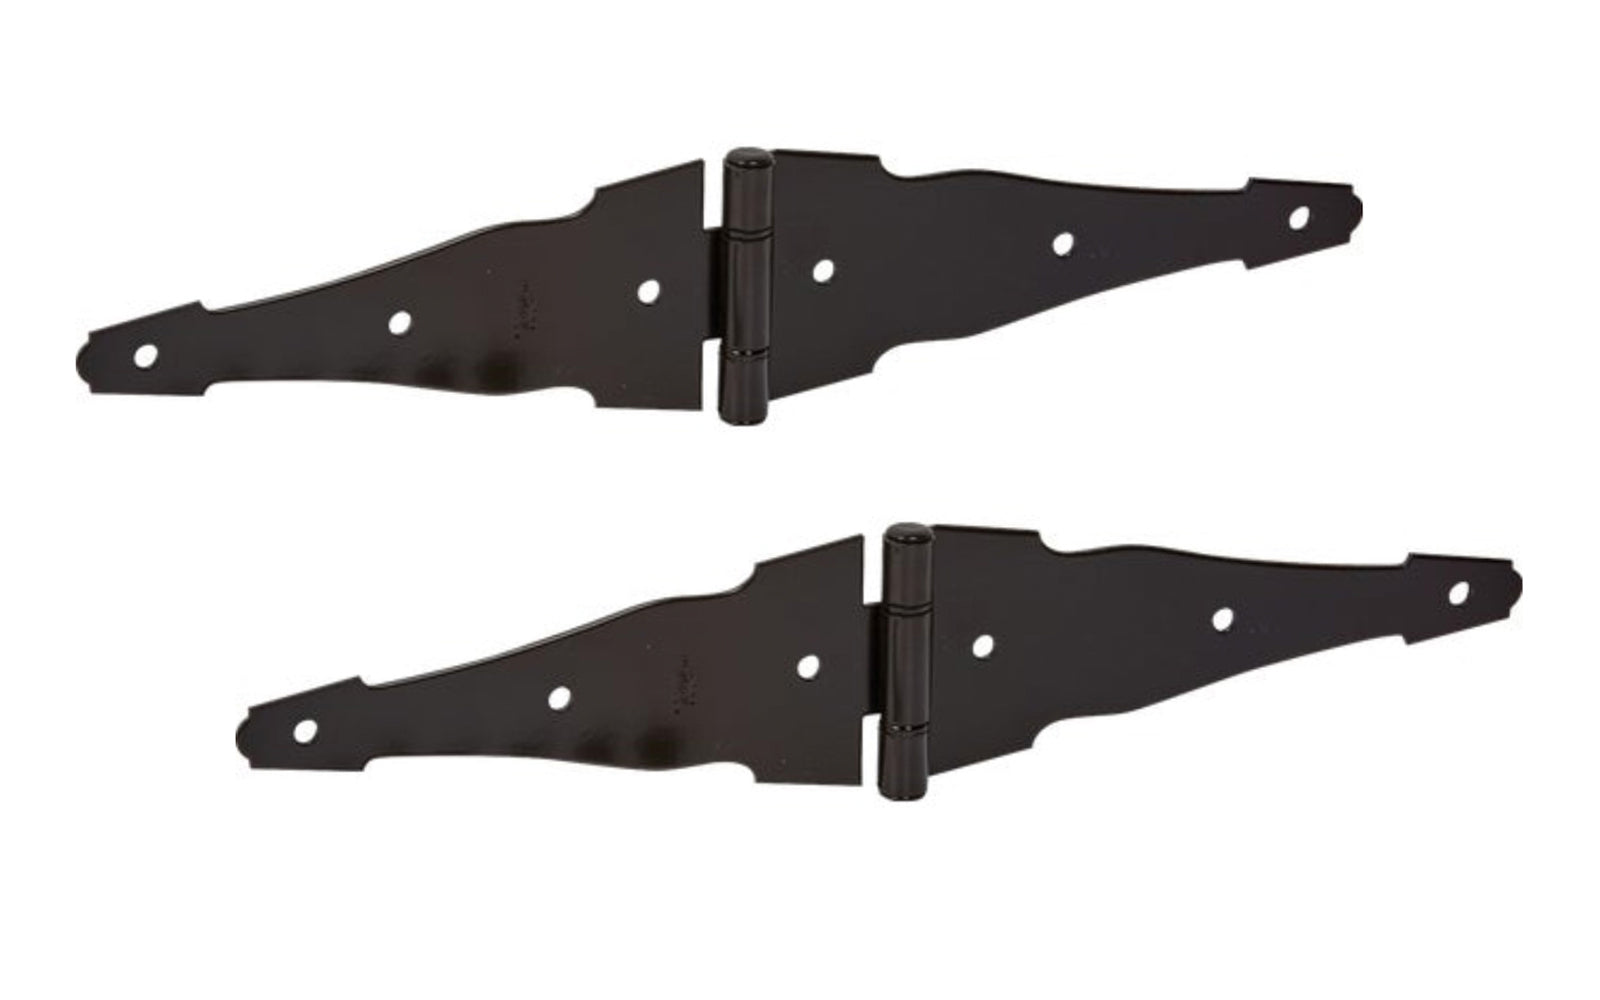 6" Black Finish Ornamental Strap Hinges - 2 Pack. Heavy-duty for extra strength & designed for gates, sheds & rustic doors. Coated with "Weatherguard" protection to withstand harsh weather conditions & prevent corrosion. Sold as two hinge in packs. National Hardware Catalog Model No. N881-946.